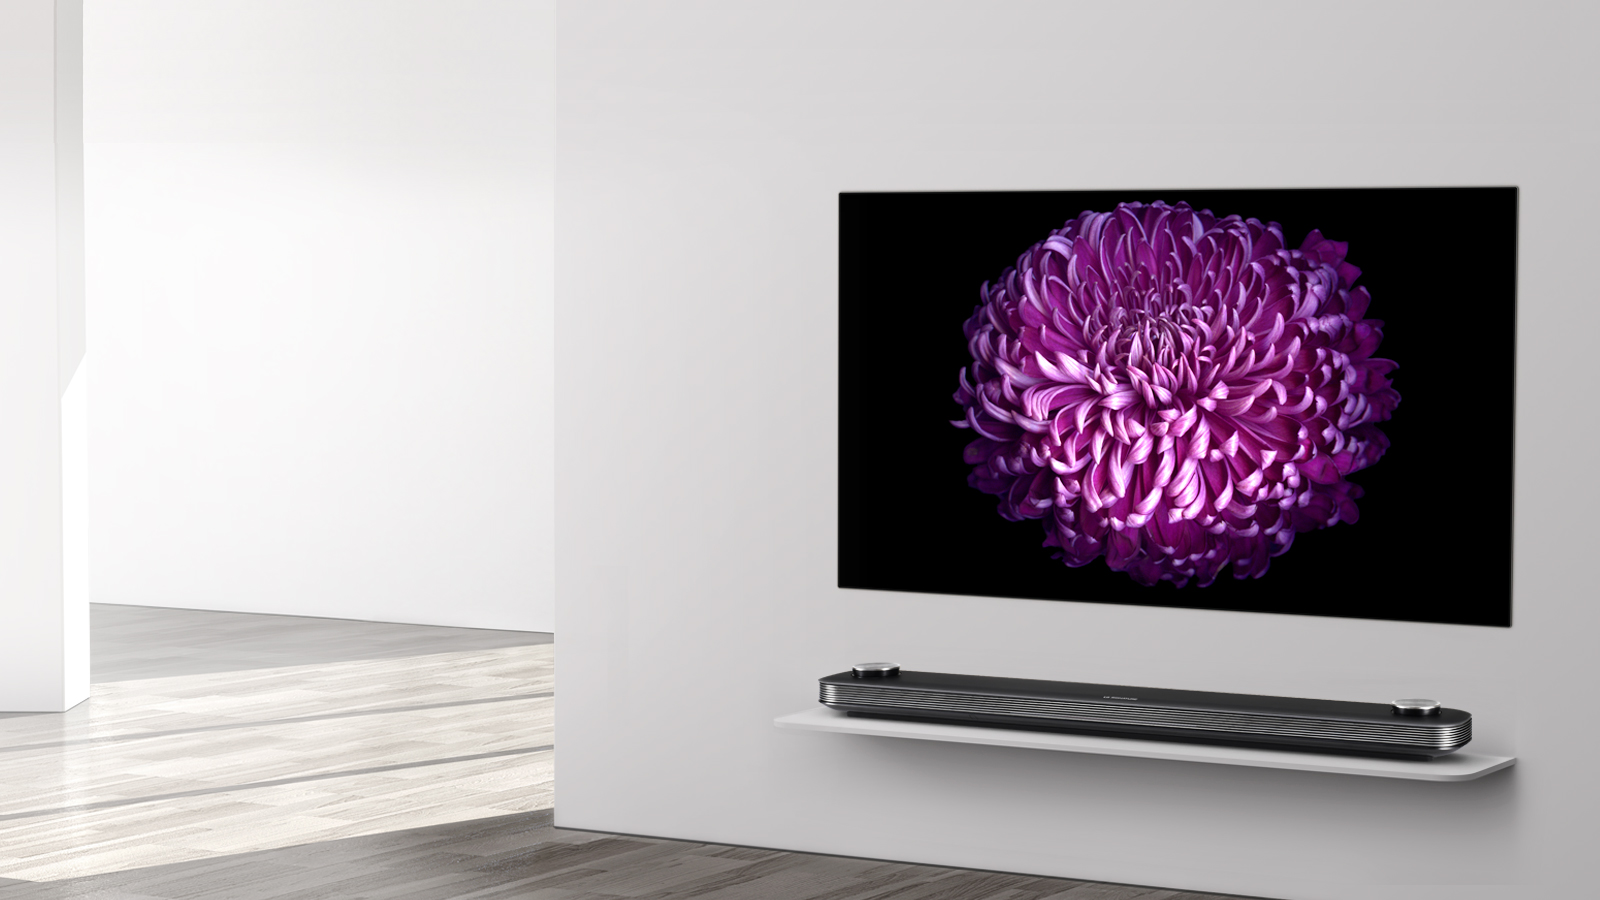 Chinese TV Maker Skyworth Accused of Ripping Off LG's 'Wallpaper' TV | Be  Korea-savvy